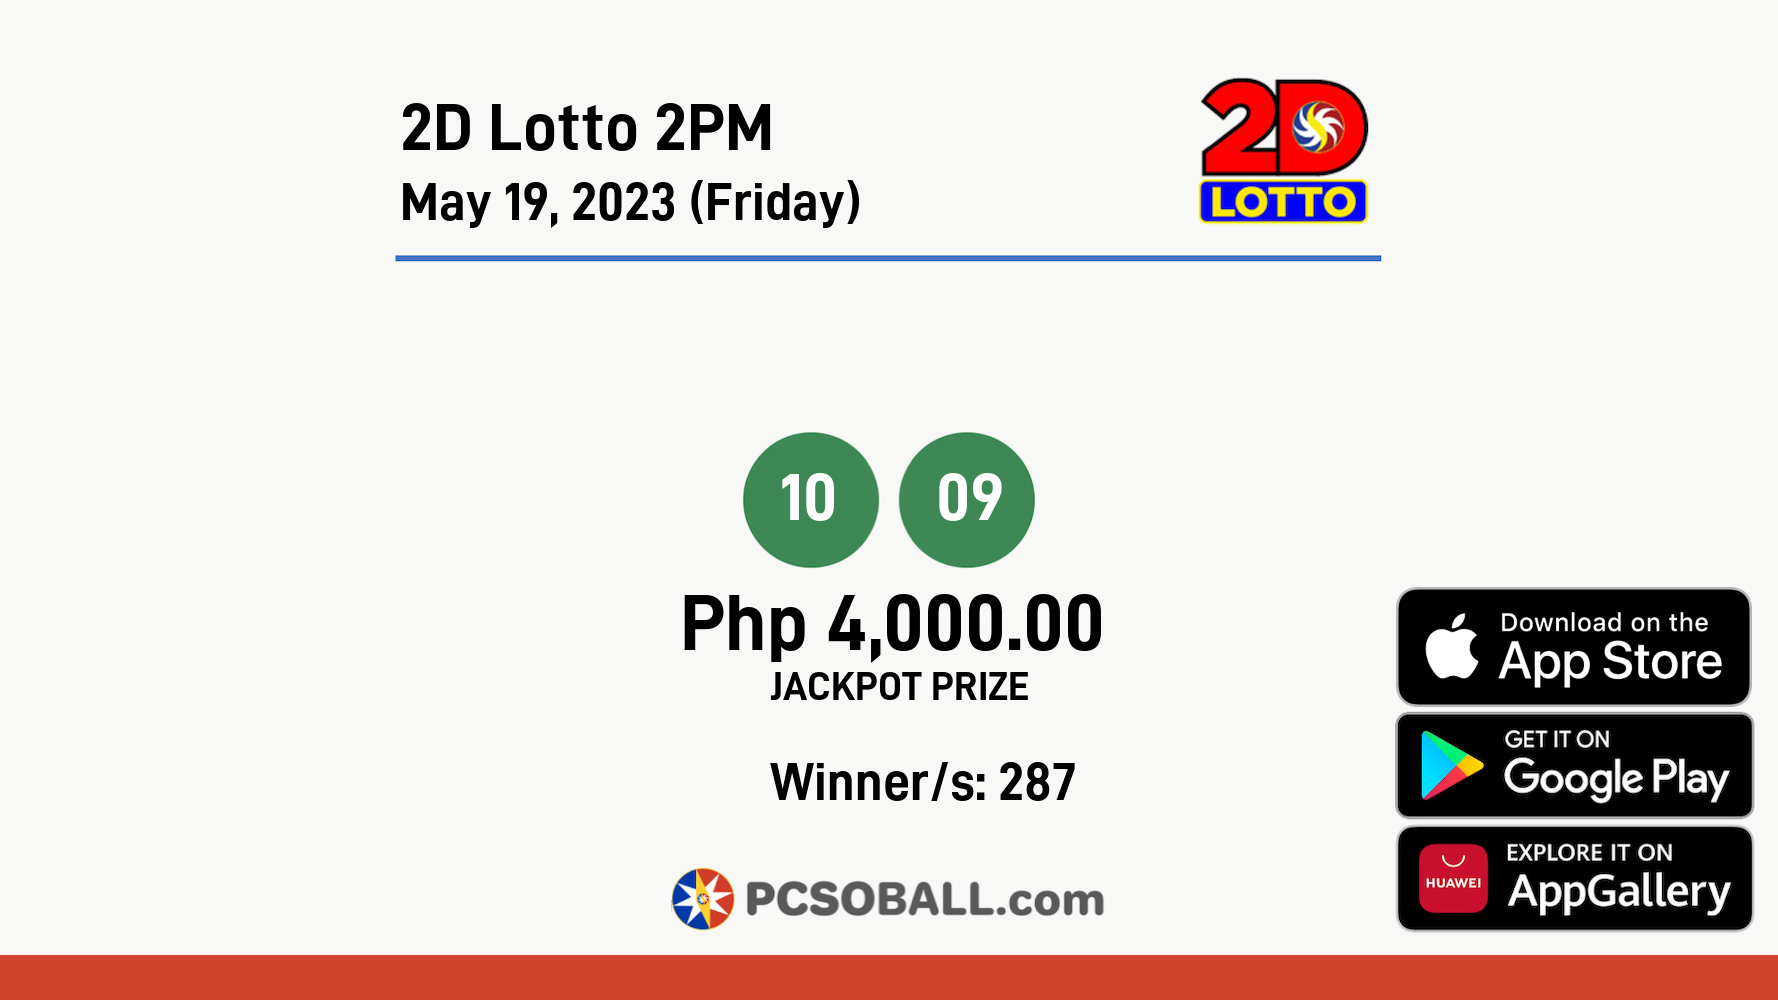 2D Lotto 2PM May 19, 2023 (Friday) Result